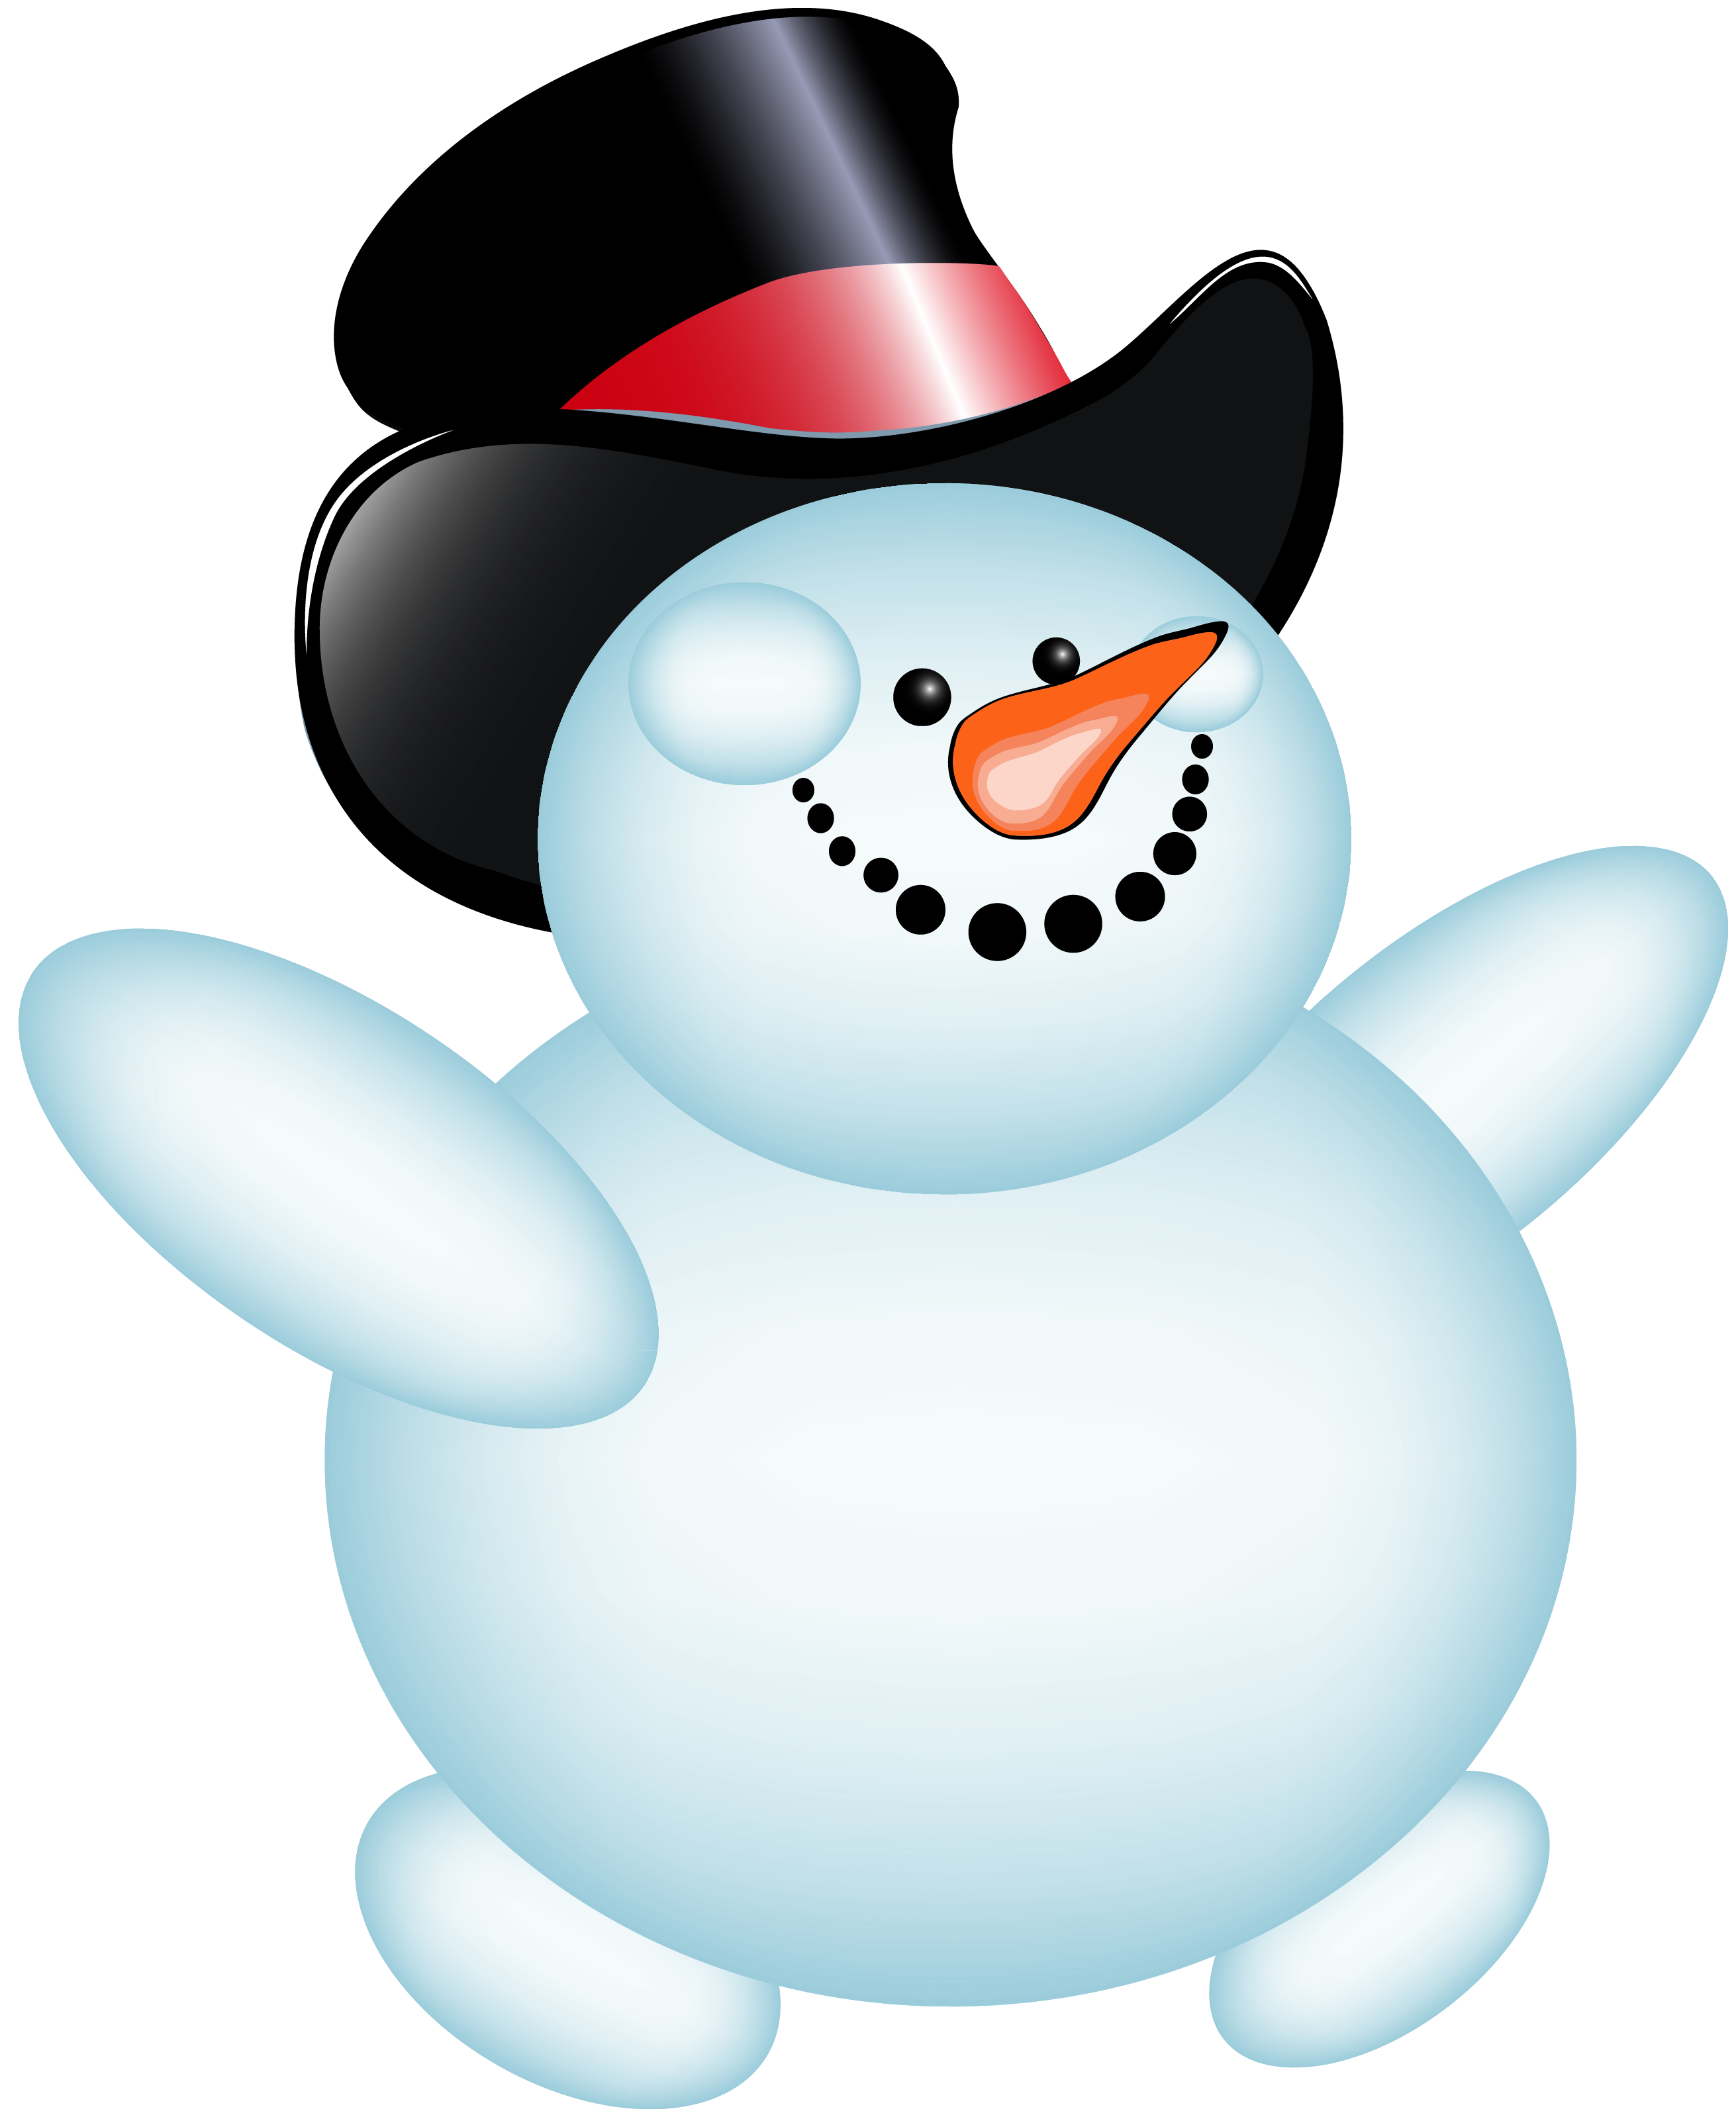 Christmas snowman at getdrawings. Clipart snow backdrop